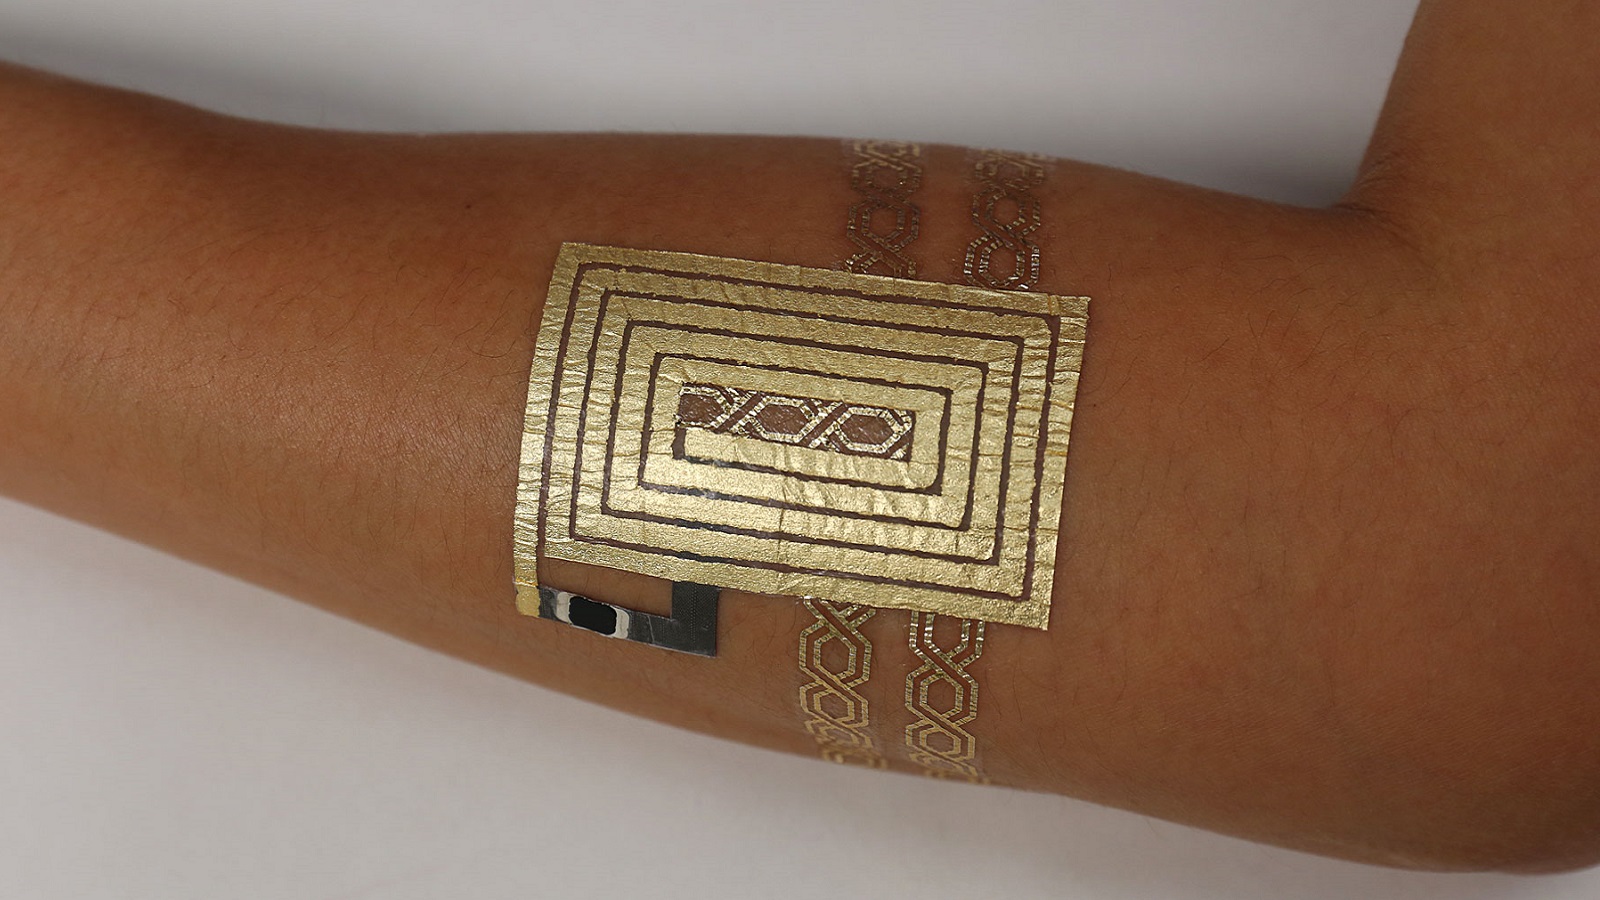 Use Tattoos as On-Skin Interface to Control Your Phone